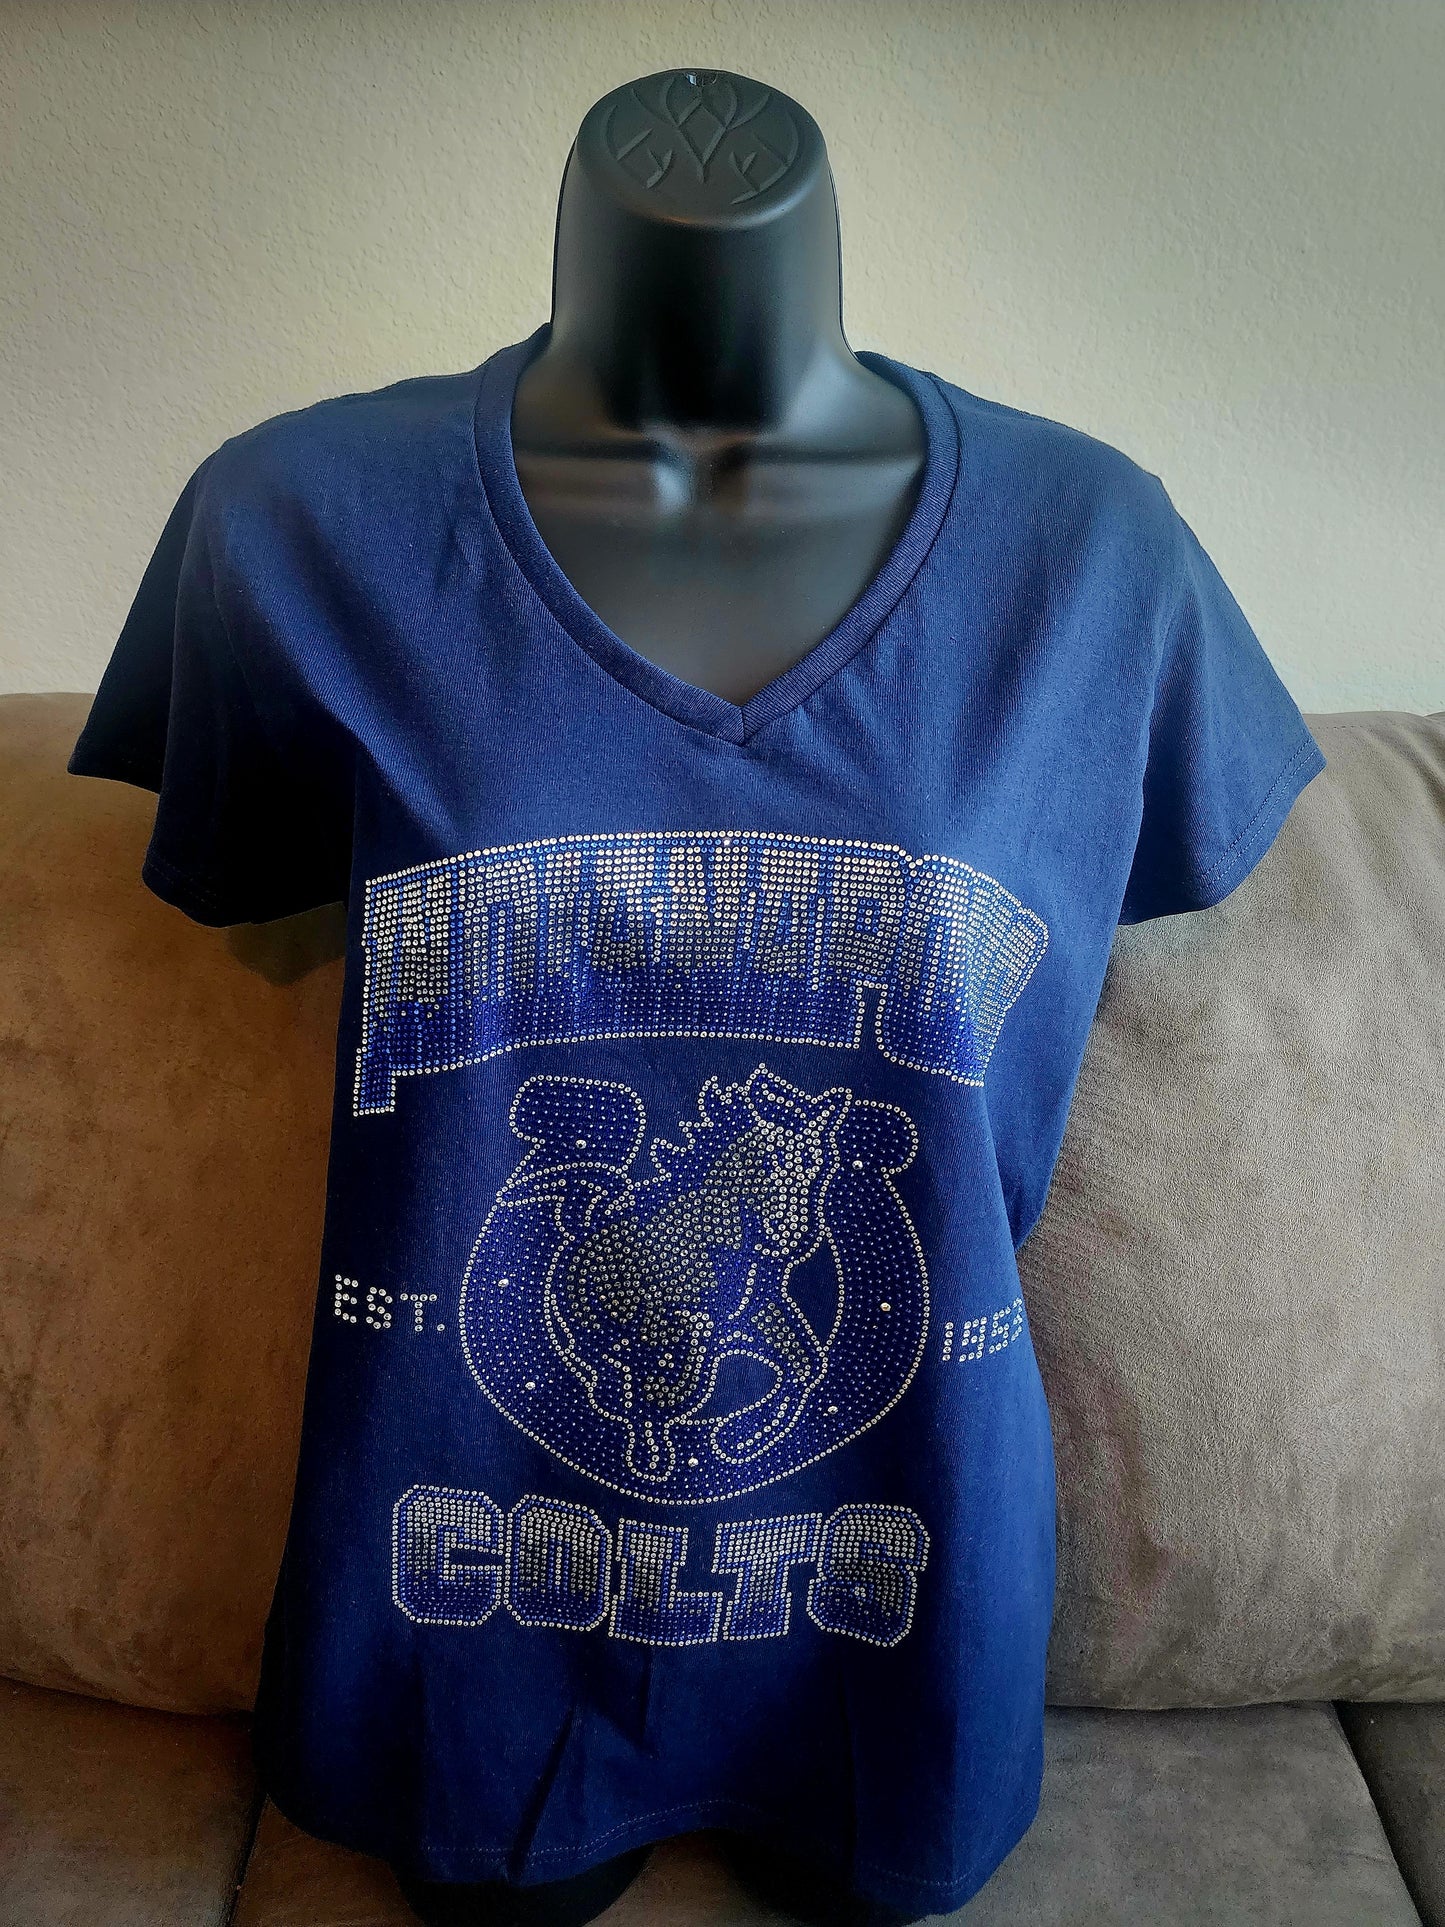 Indianapolis Colts Rhinestone Bling Design (Blended Letters)